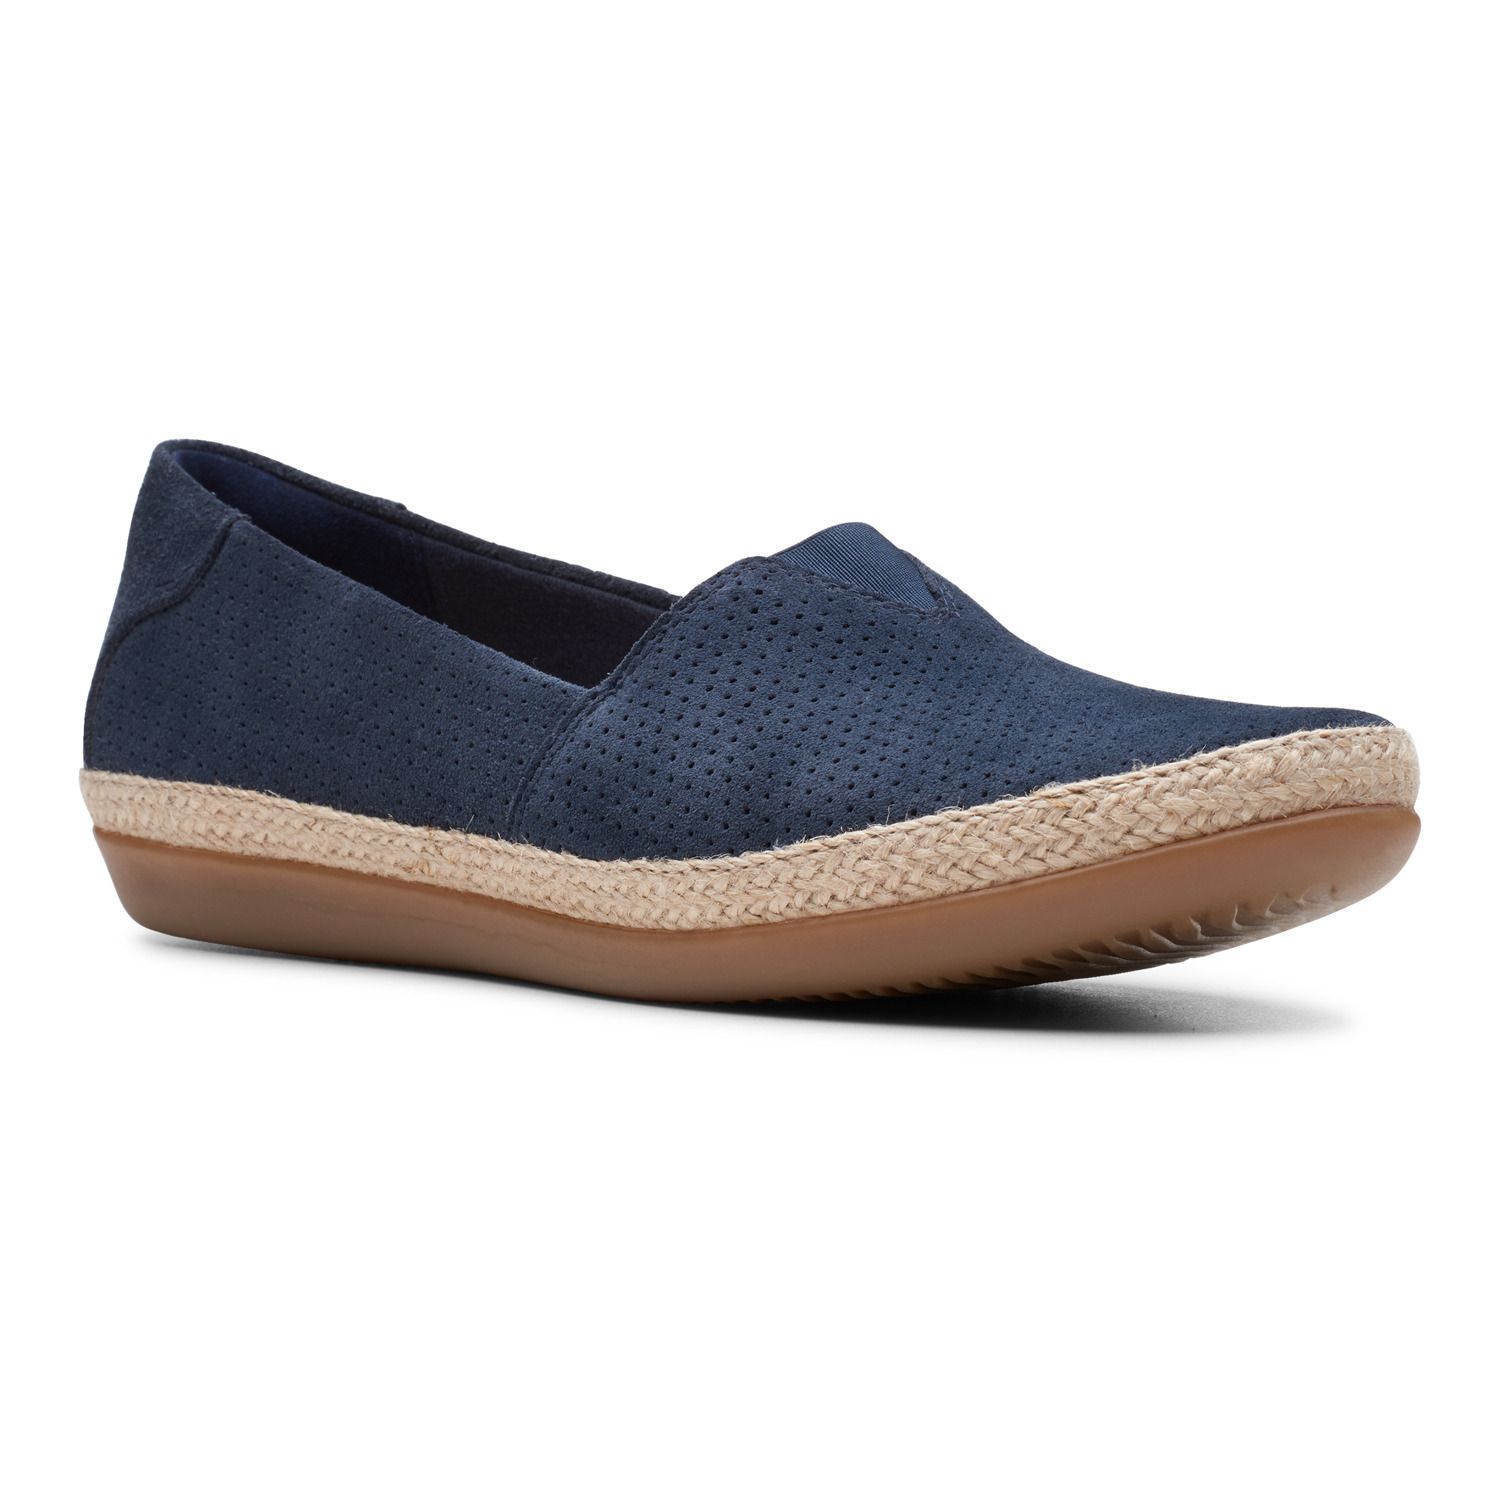 clarks slip on shoes womens 